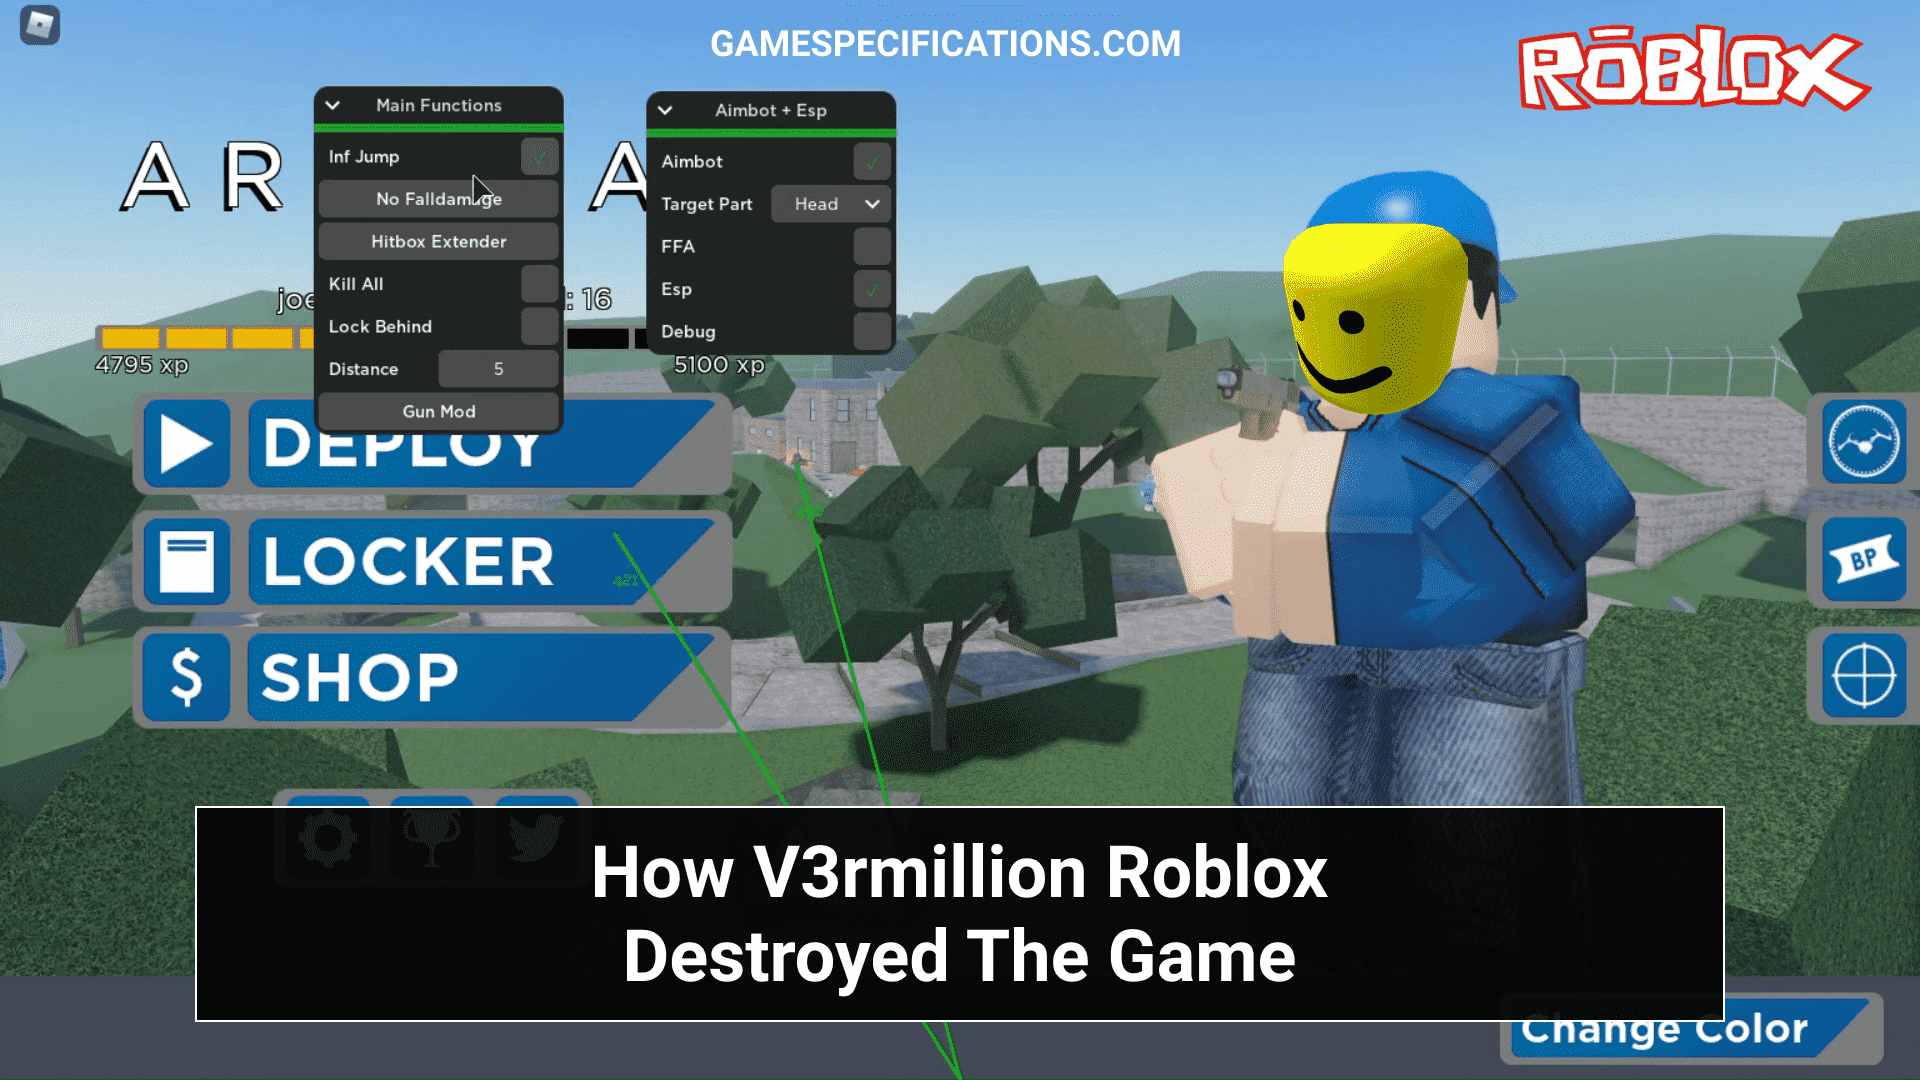 V3rmillion Roblox Breaked The Game By Using Powerful Exploits And Scripts Game Specifications - what is a dll injector roblox